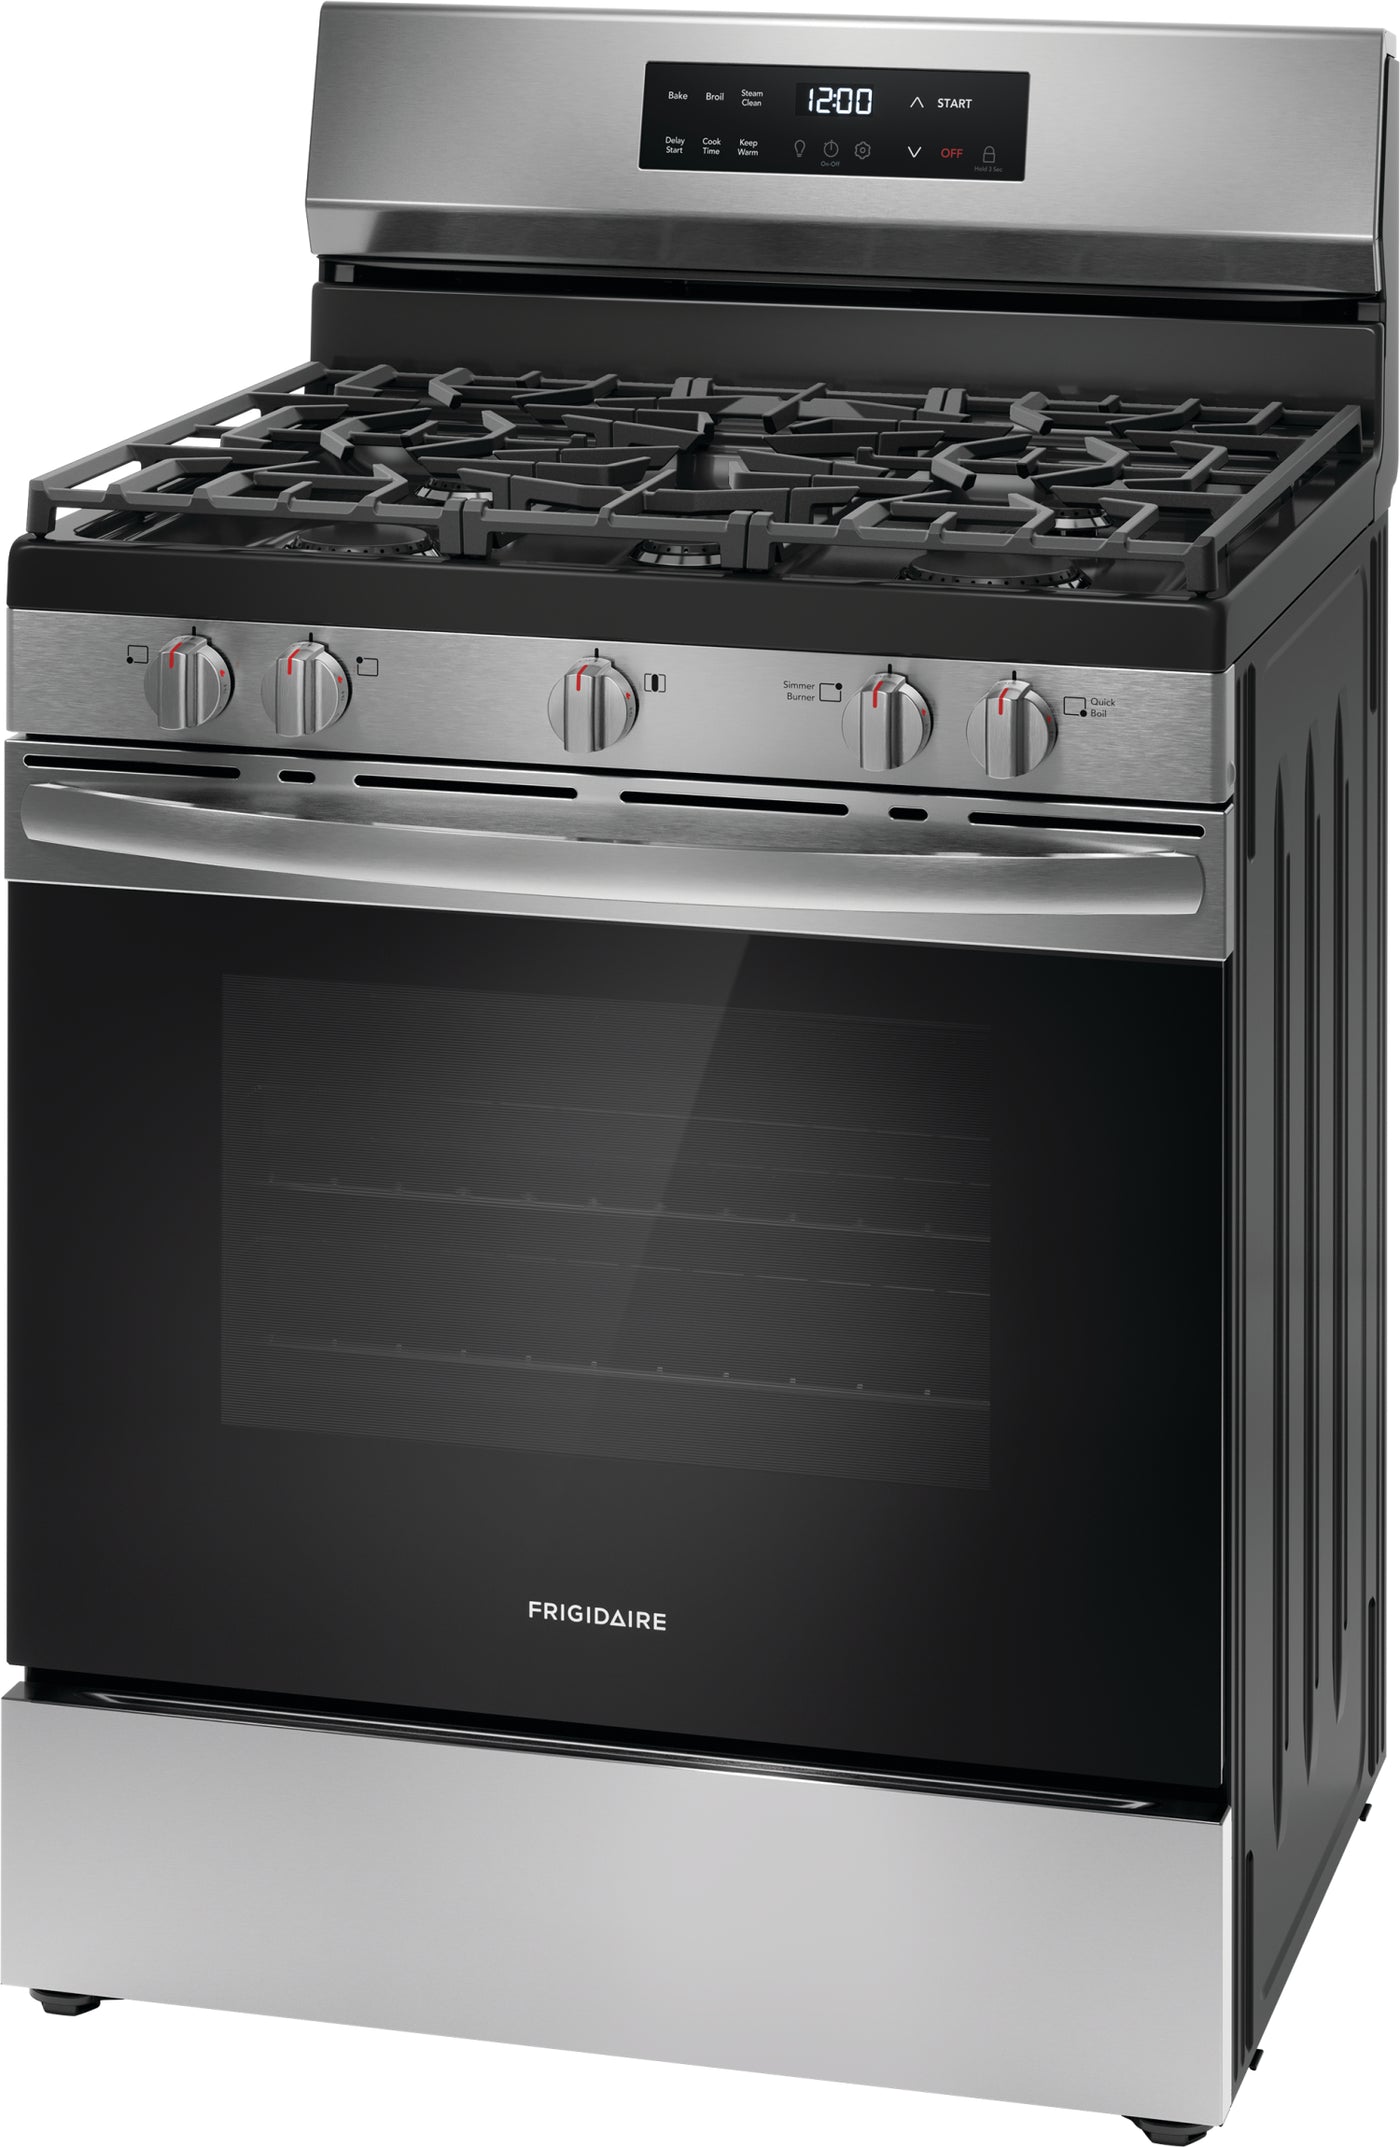 Frigidaire Stainless Steel 30" Gas Range with Quick Boil and Even Baking Technology (5.1 Cu. Ft) - FCRG3062AS